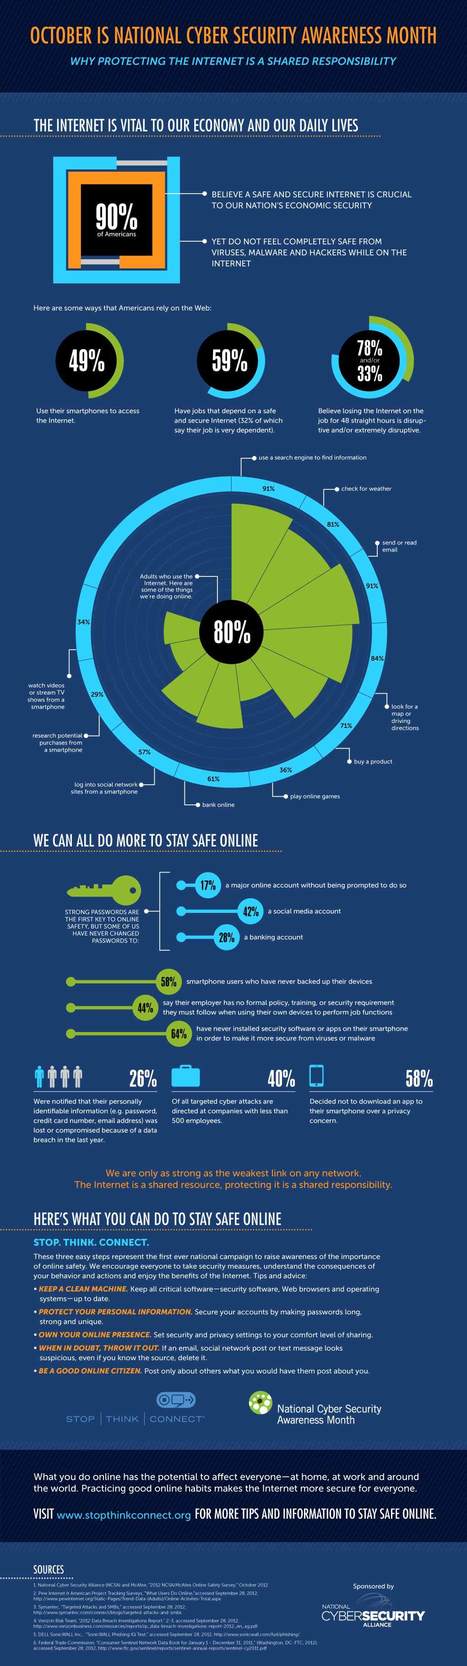 Protecting the Internet Infographic | StaySafeOnline.org | 21st Century Learning and Teaching | Scoop.it